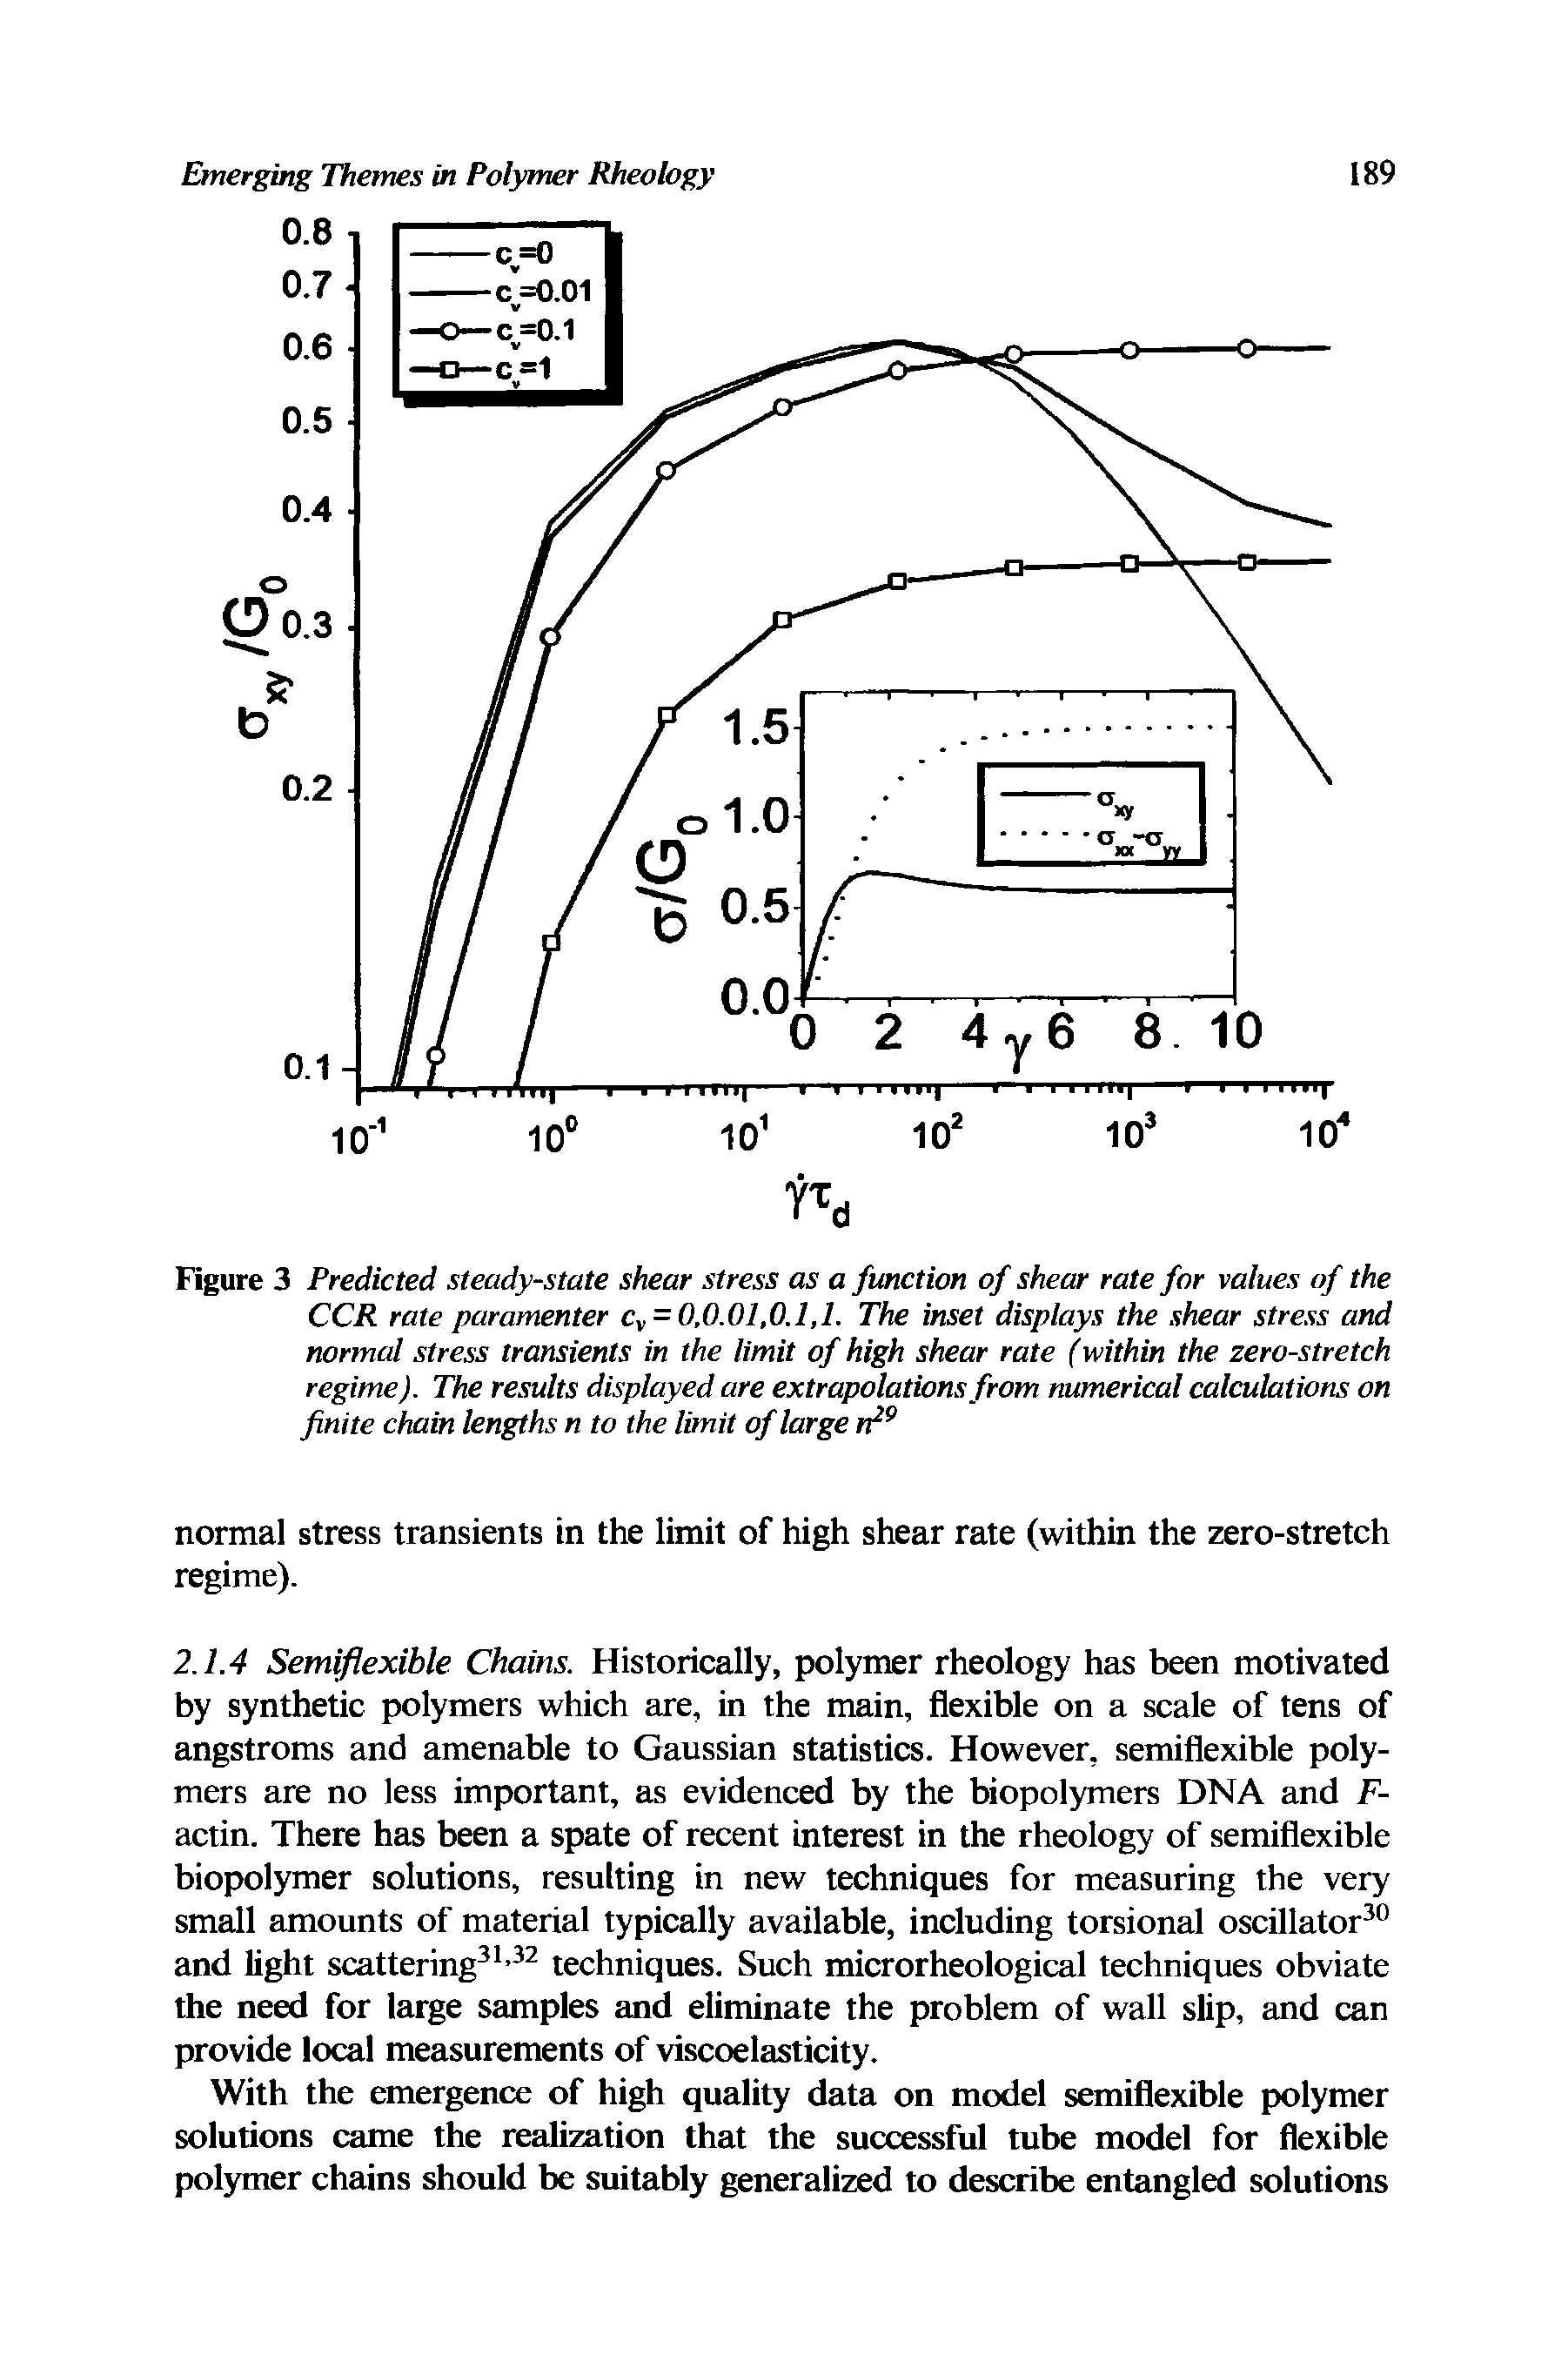 Figure 3 Predicted steady-state shear stress as a function of shear rate for values of the CCR rate paramenter Cy = 0,0.01,0.1,1. The inset displays the shear stress and normal stress transients in the limit of high shear rate (within the zero-stretch regime). The results displayed are extrapolations from numerical calculations on finite chain lengths n to the limit of large n ...